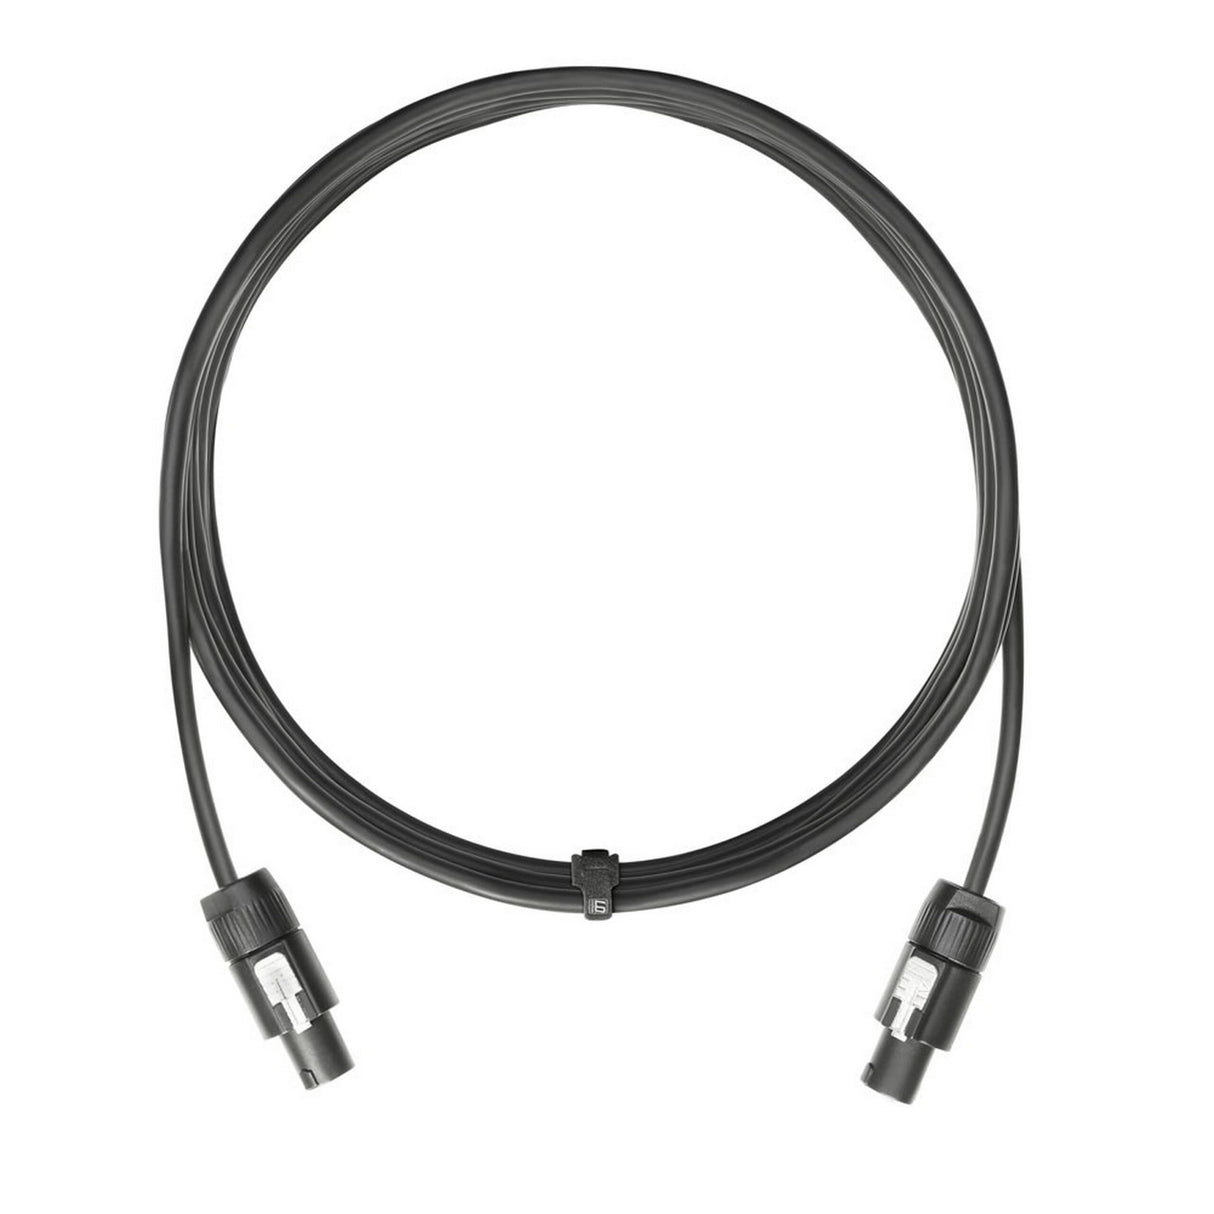 LD Systems CURV 500 CABLE 1 Standard Speaker Connector to Standard Speaker Connector Cable, 2.2 Meters